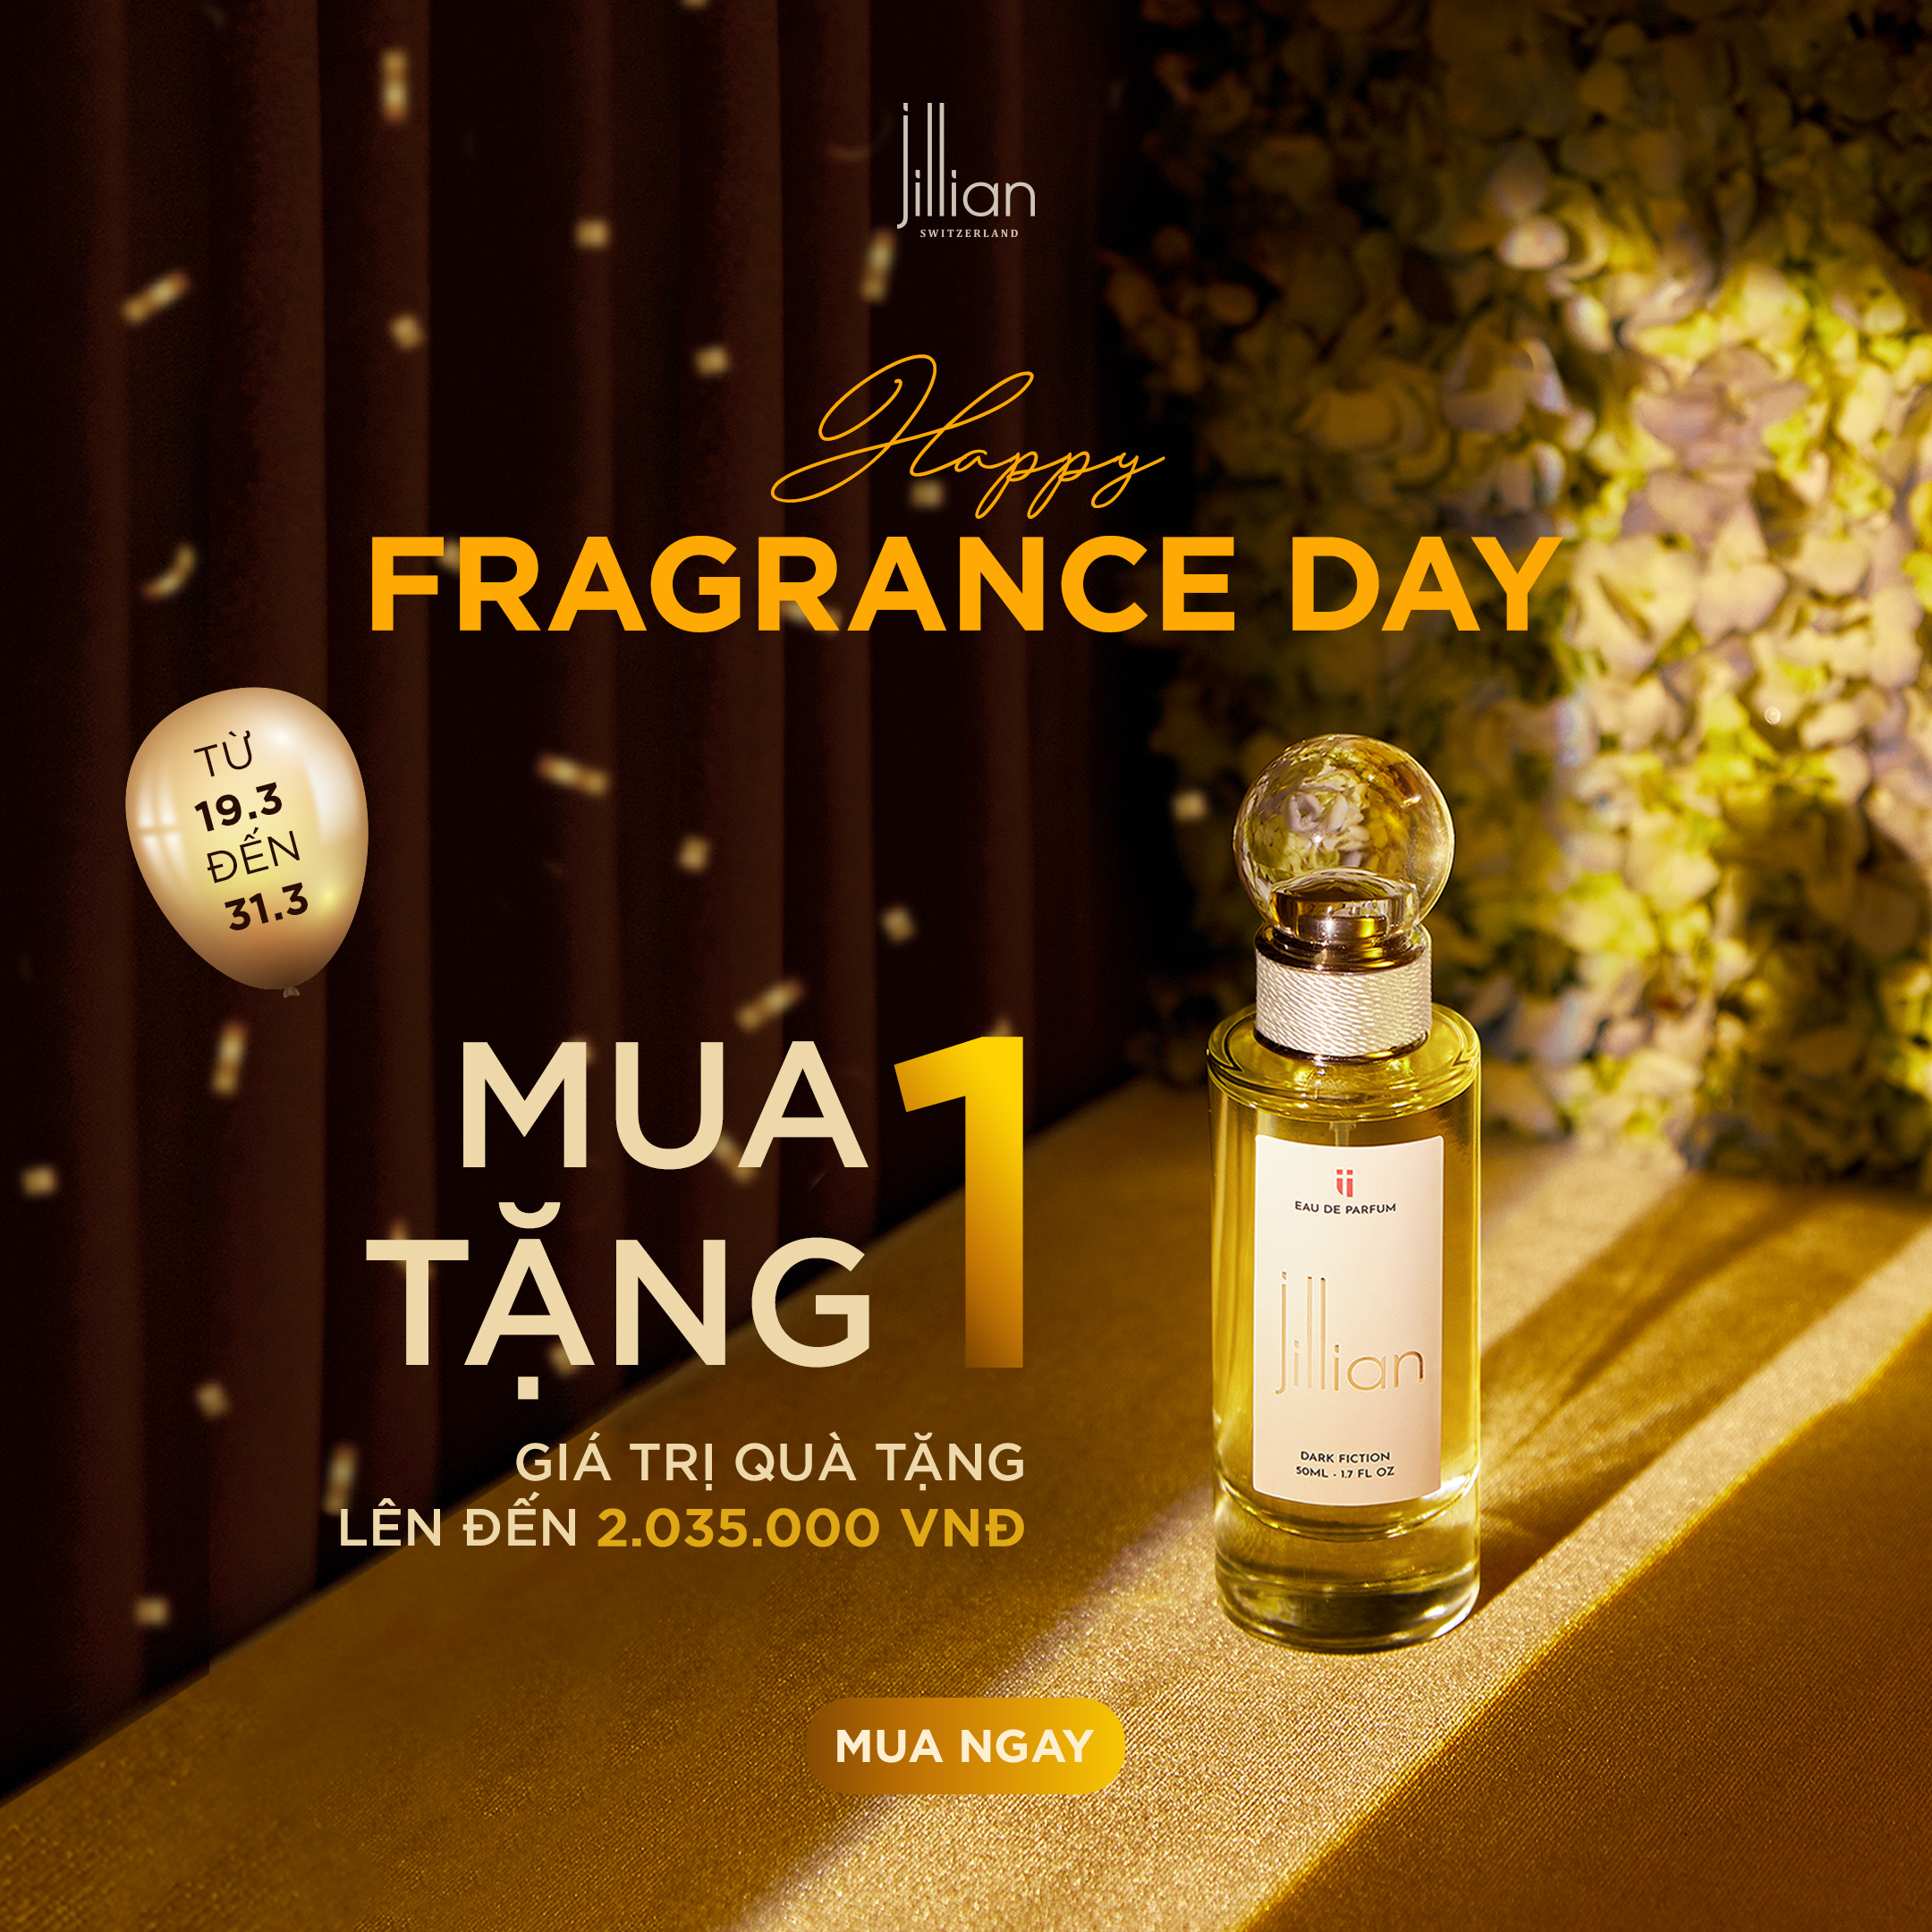 HAPPY FRAGRANCE DAY - LUXURY GIFTS UP TO 2.035.000 VNĐ